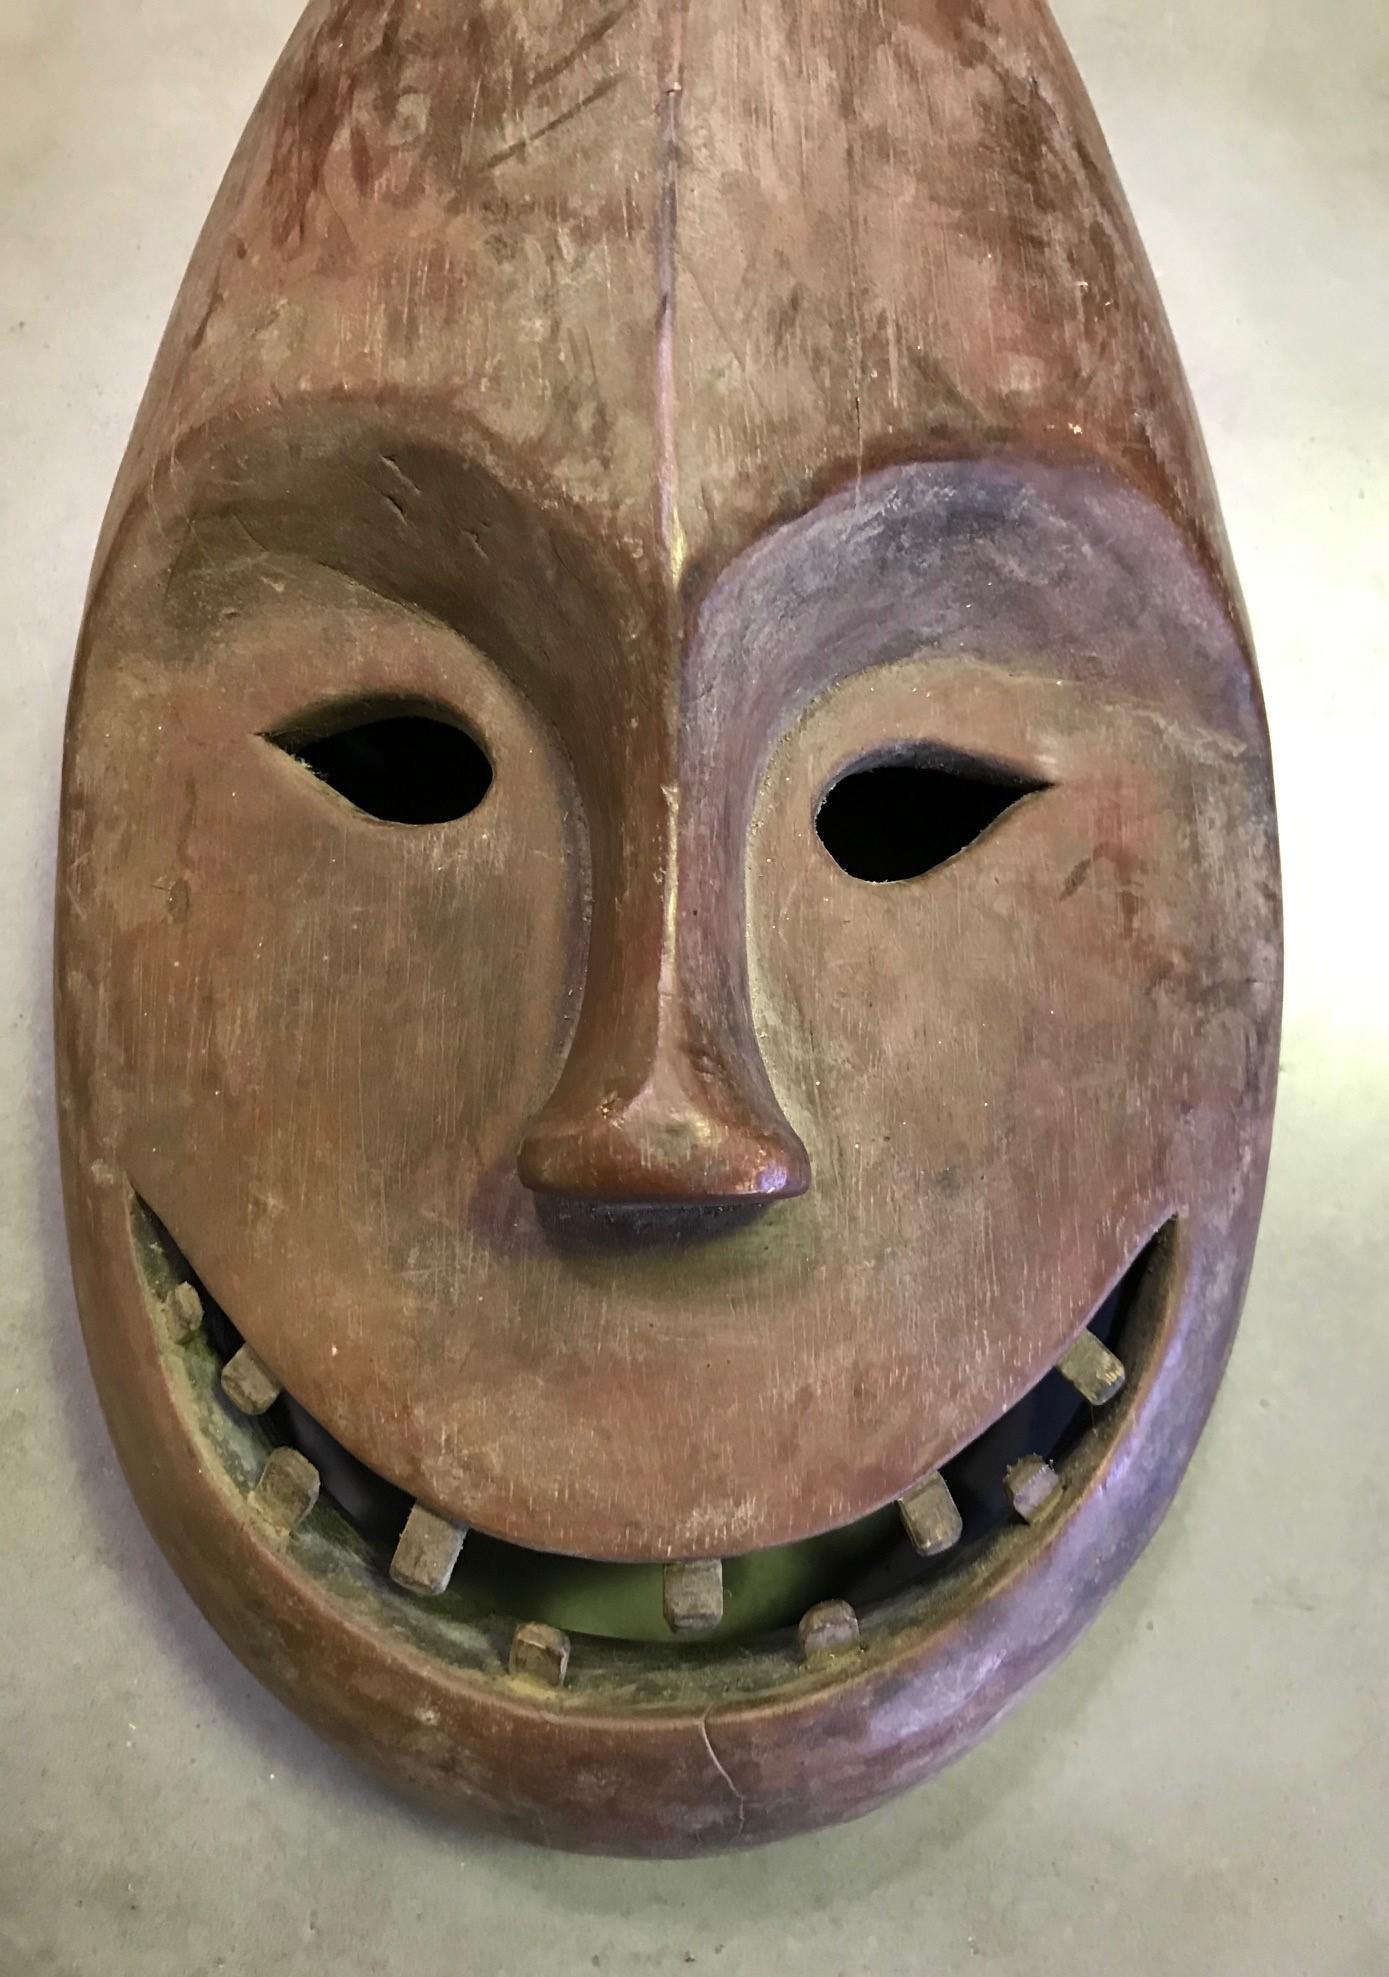 A strangely beautiful mask by the Yup'ik (Yupik) aboriginal, indigenous people of South-Western & South Central Alaska. The Yup'ik people, who are related to the Inuit peoples, have a long history of ceremonial mask making. Yup'ik masks were